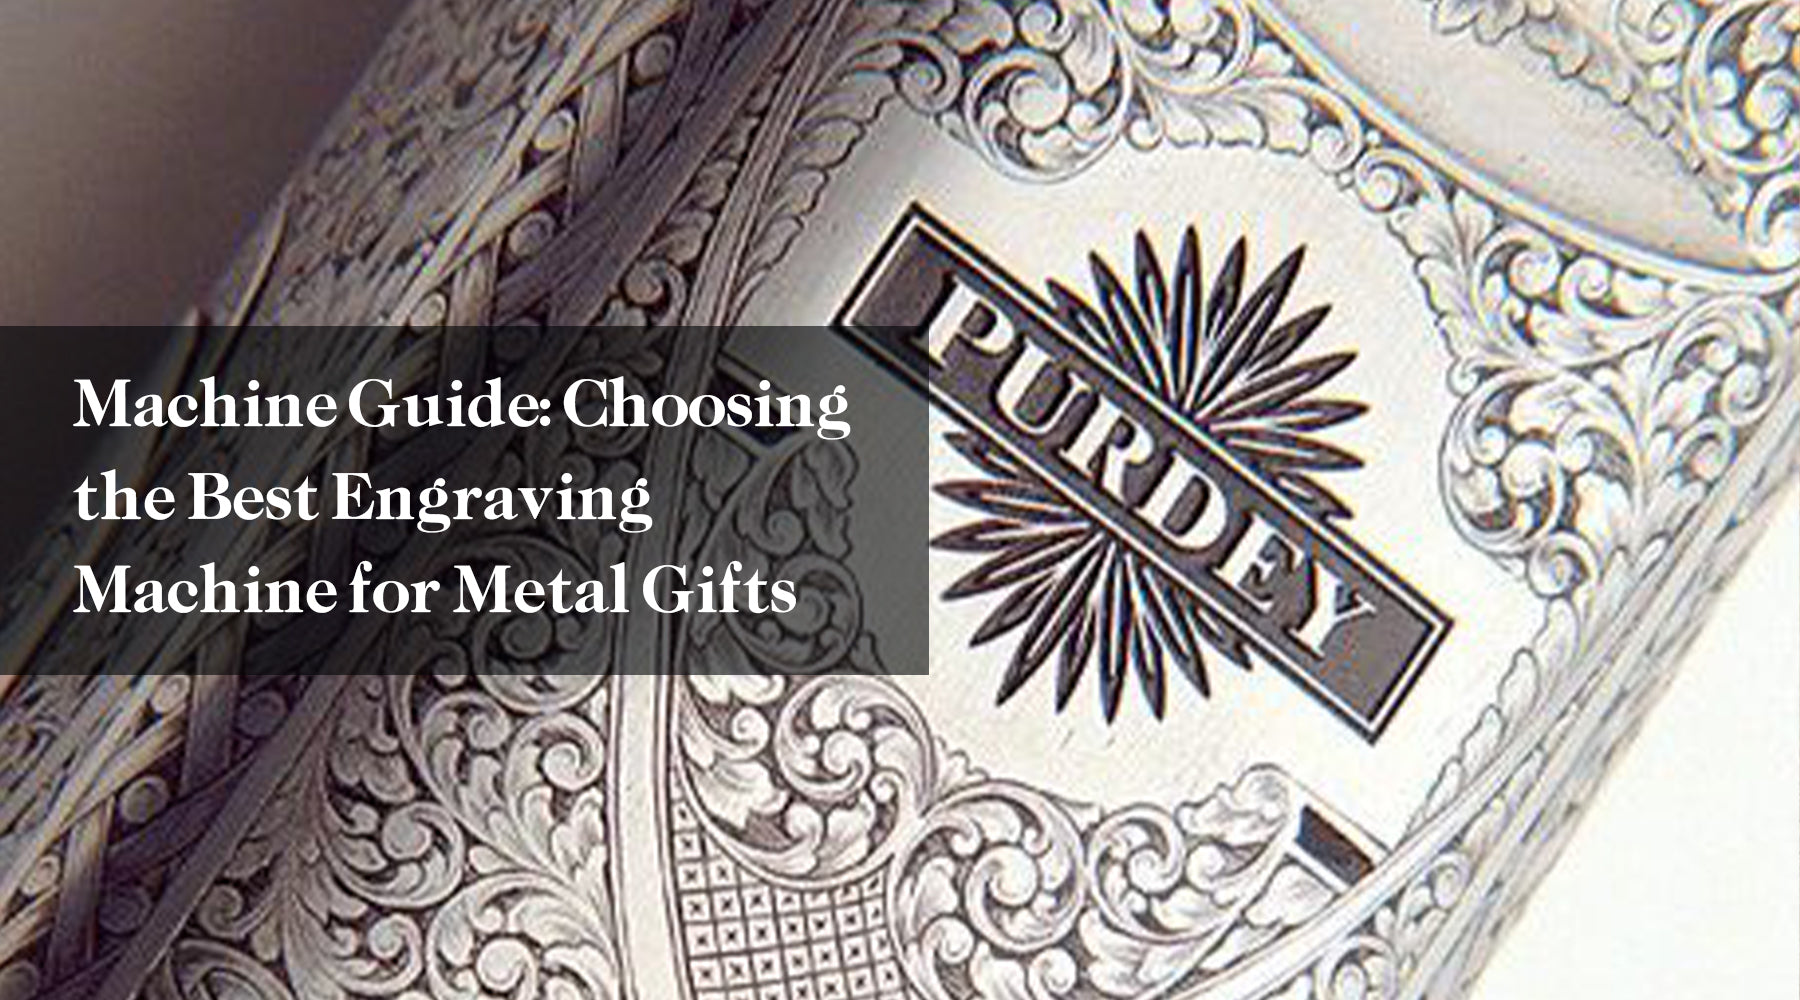 Machine Guide: Choosing the Best Engraving Machine for Metal Gifts